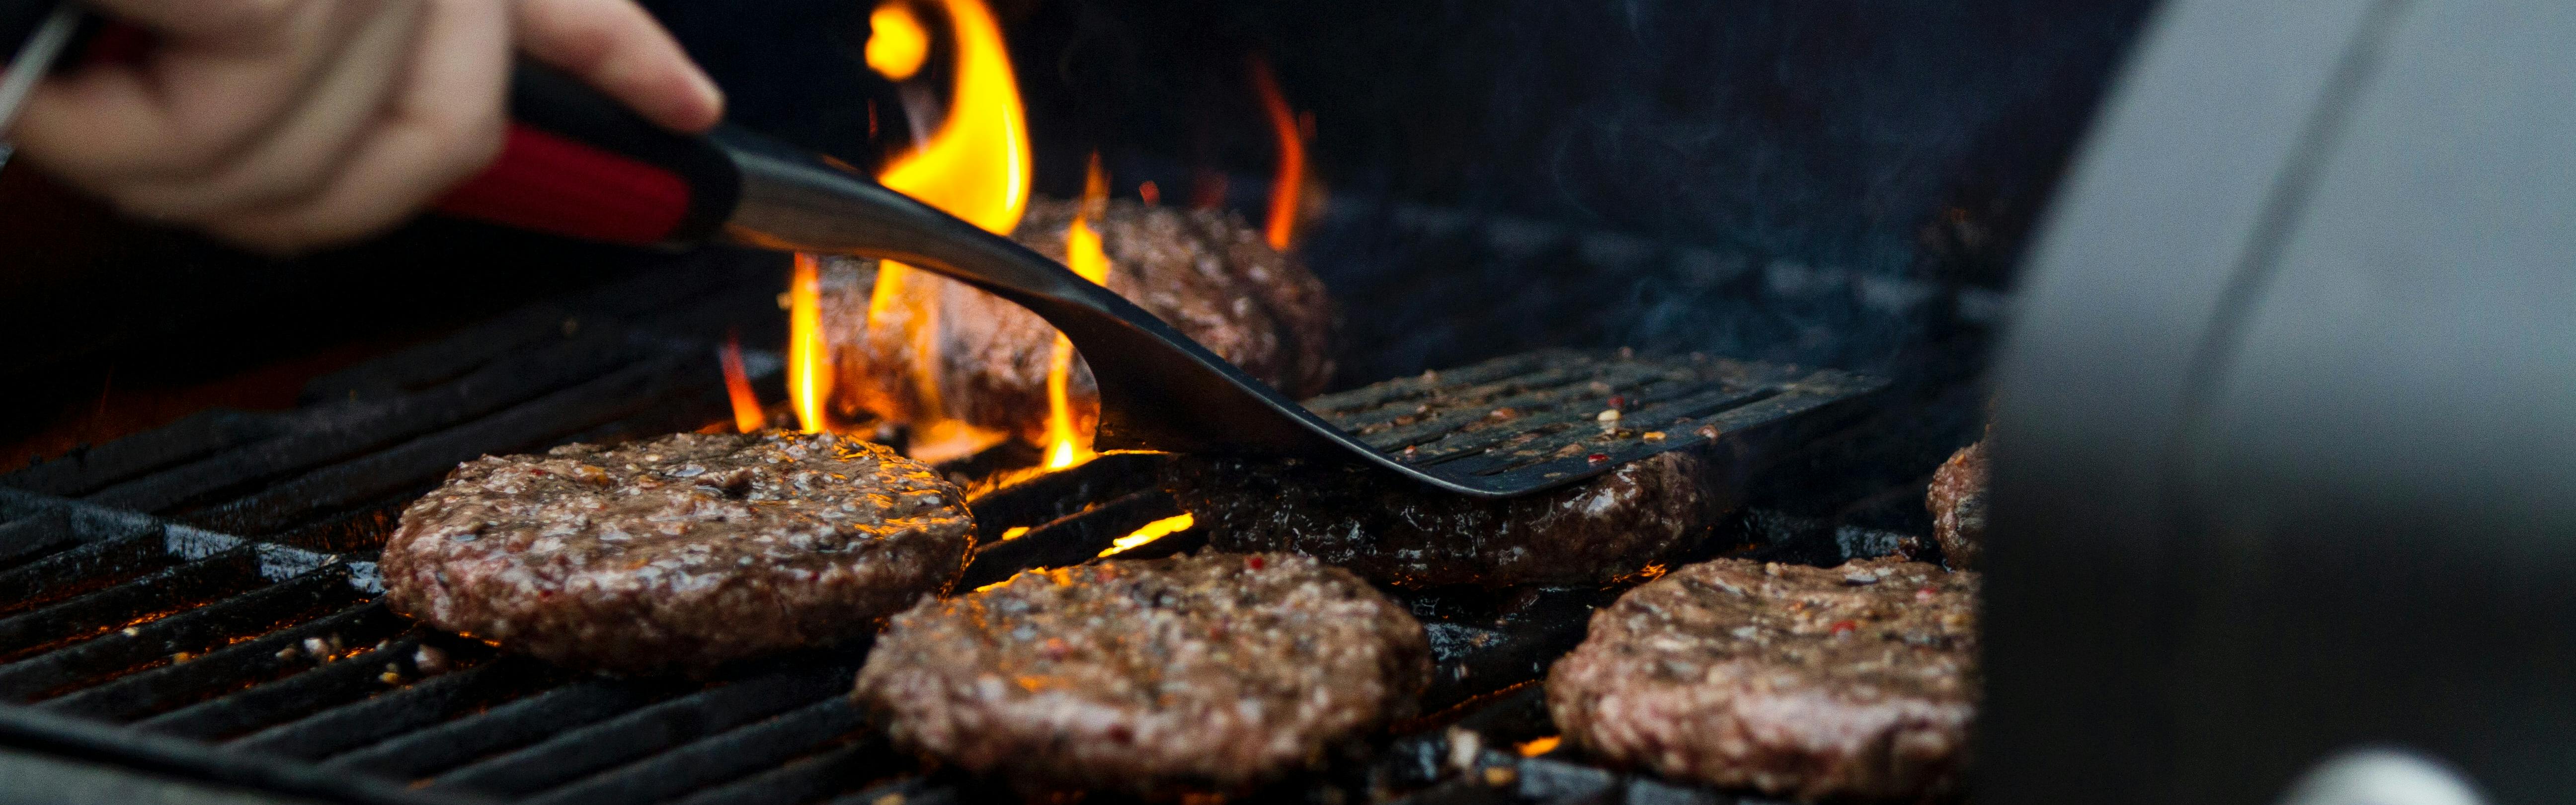 Burgers being grilled on a gas grill.